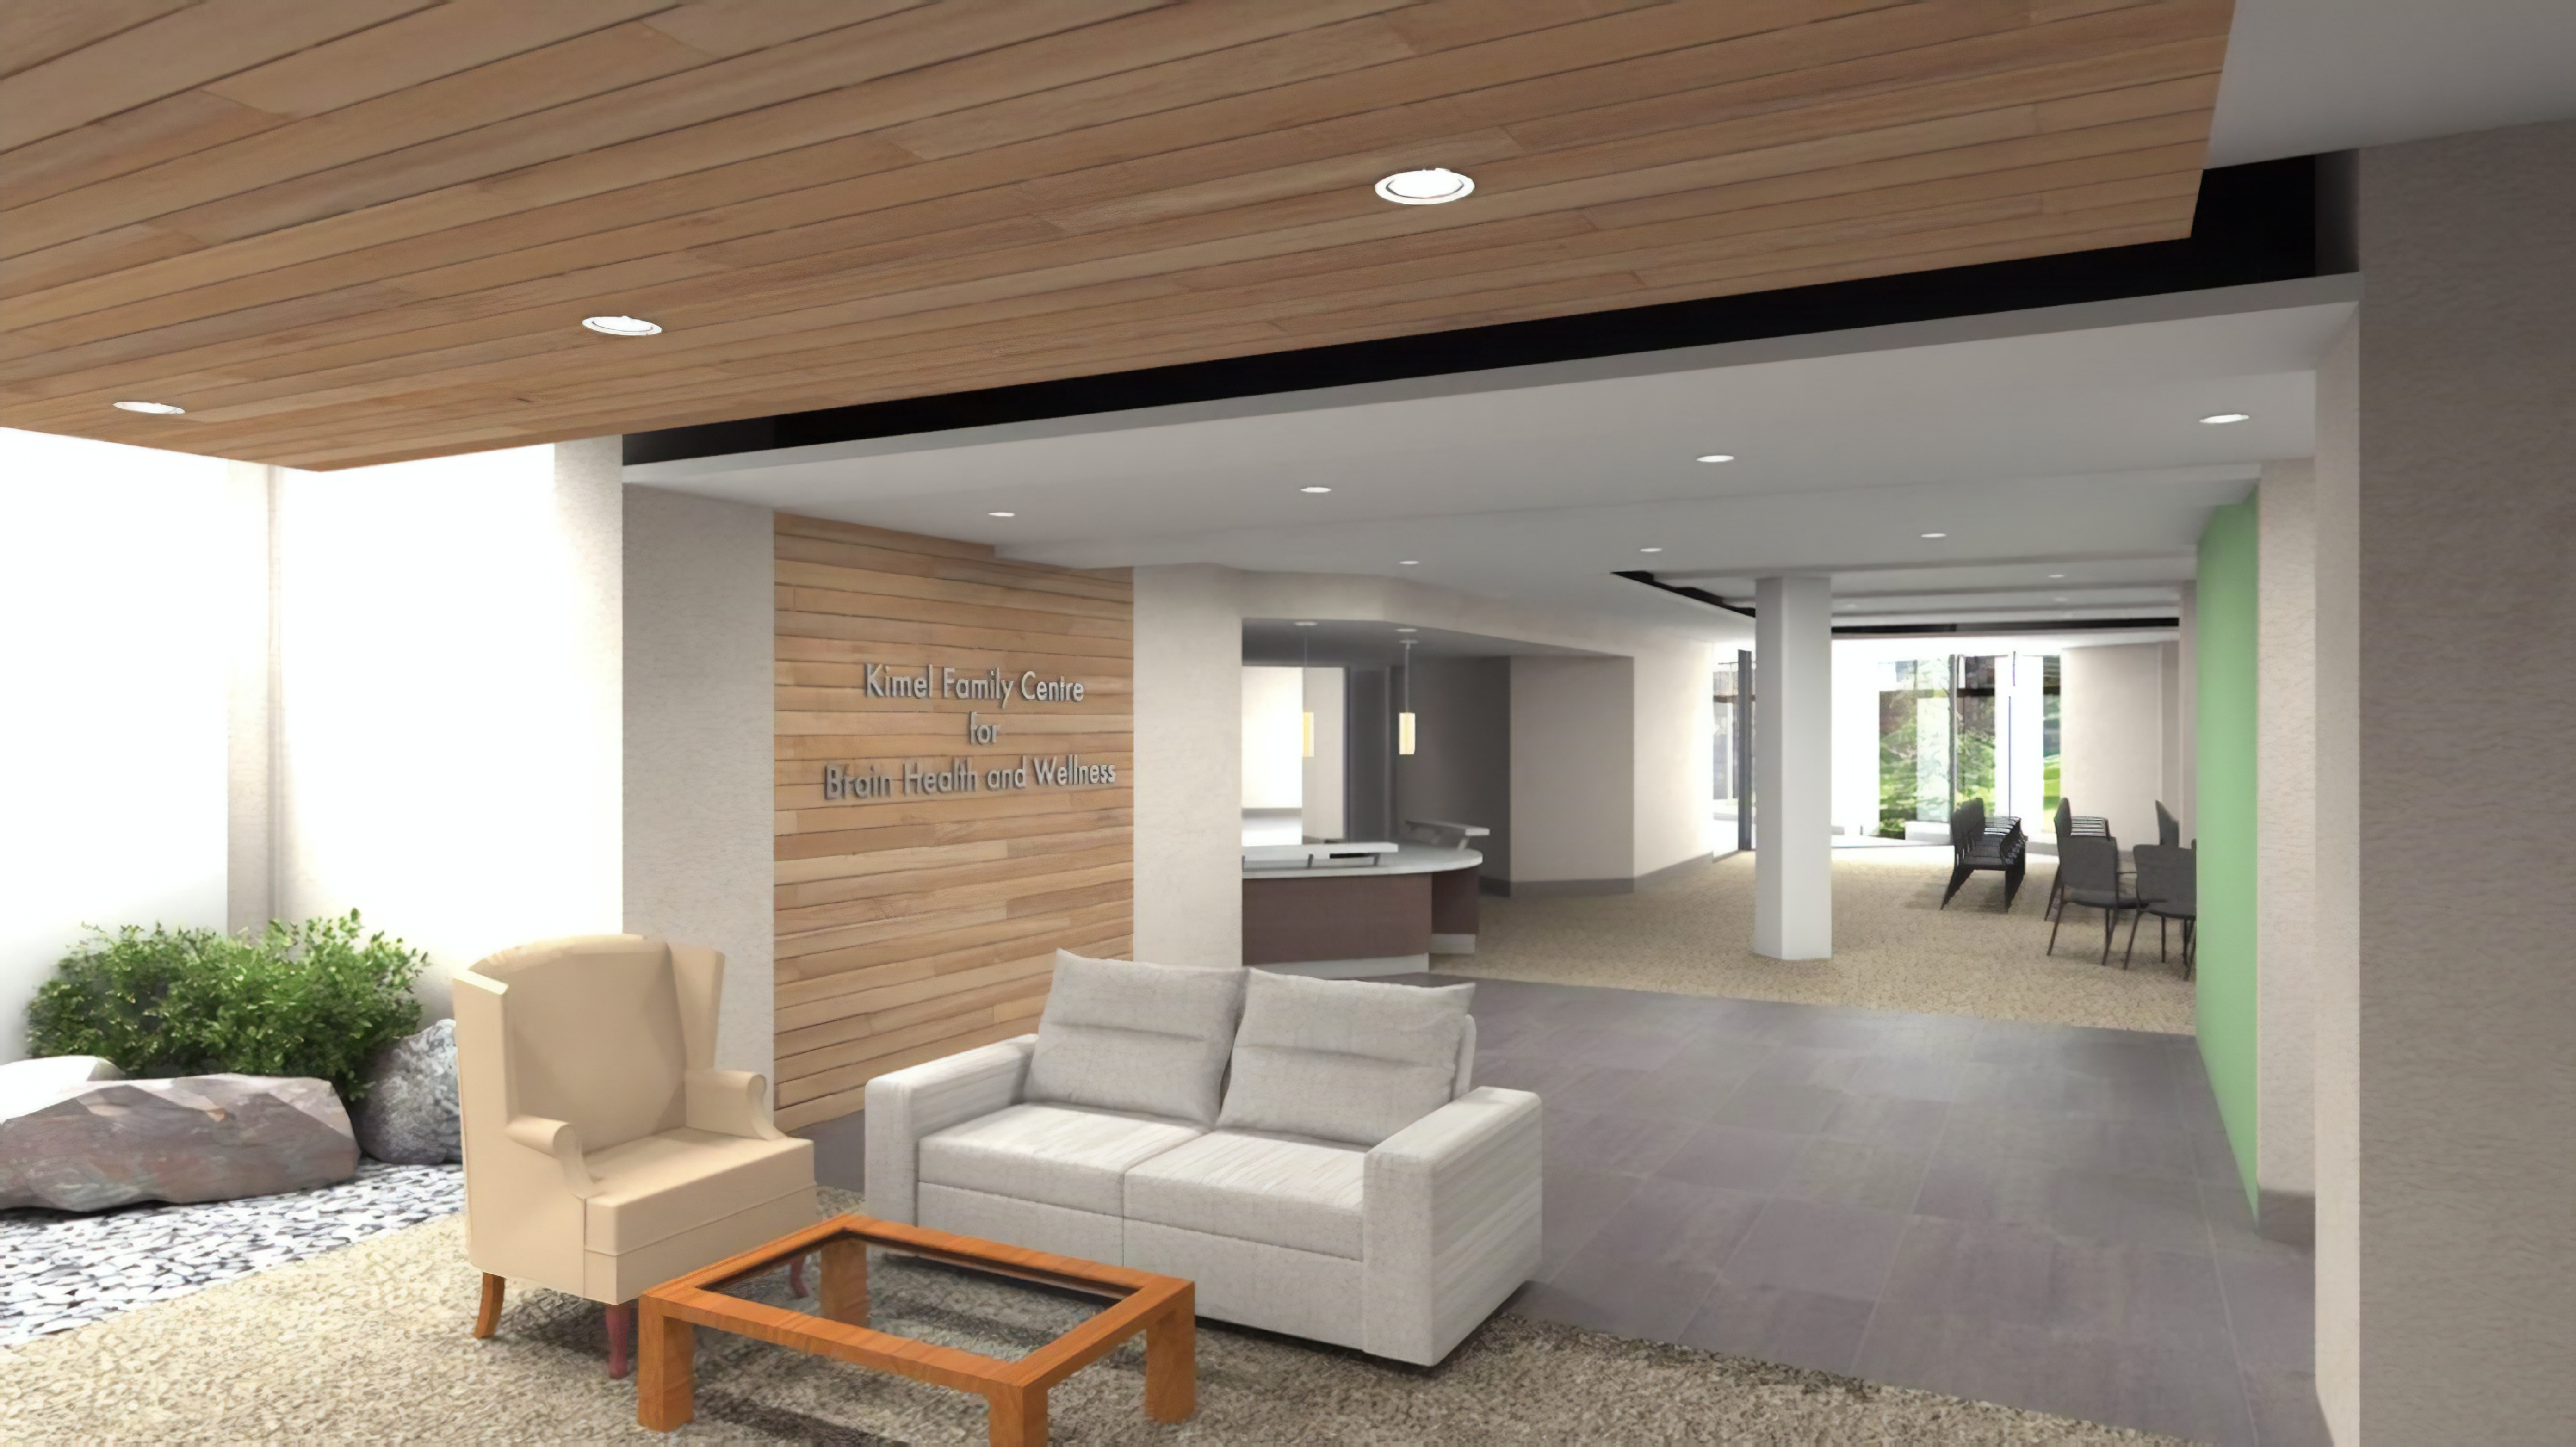 Baycrest announces plans for first-of-its-kind brain health facility in Canada